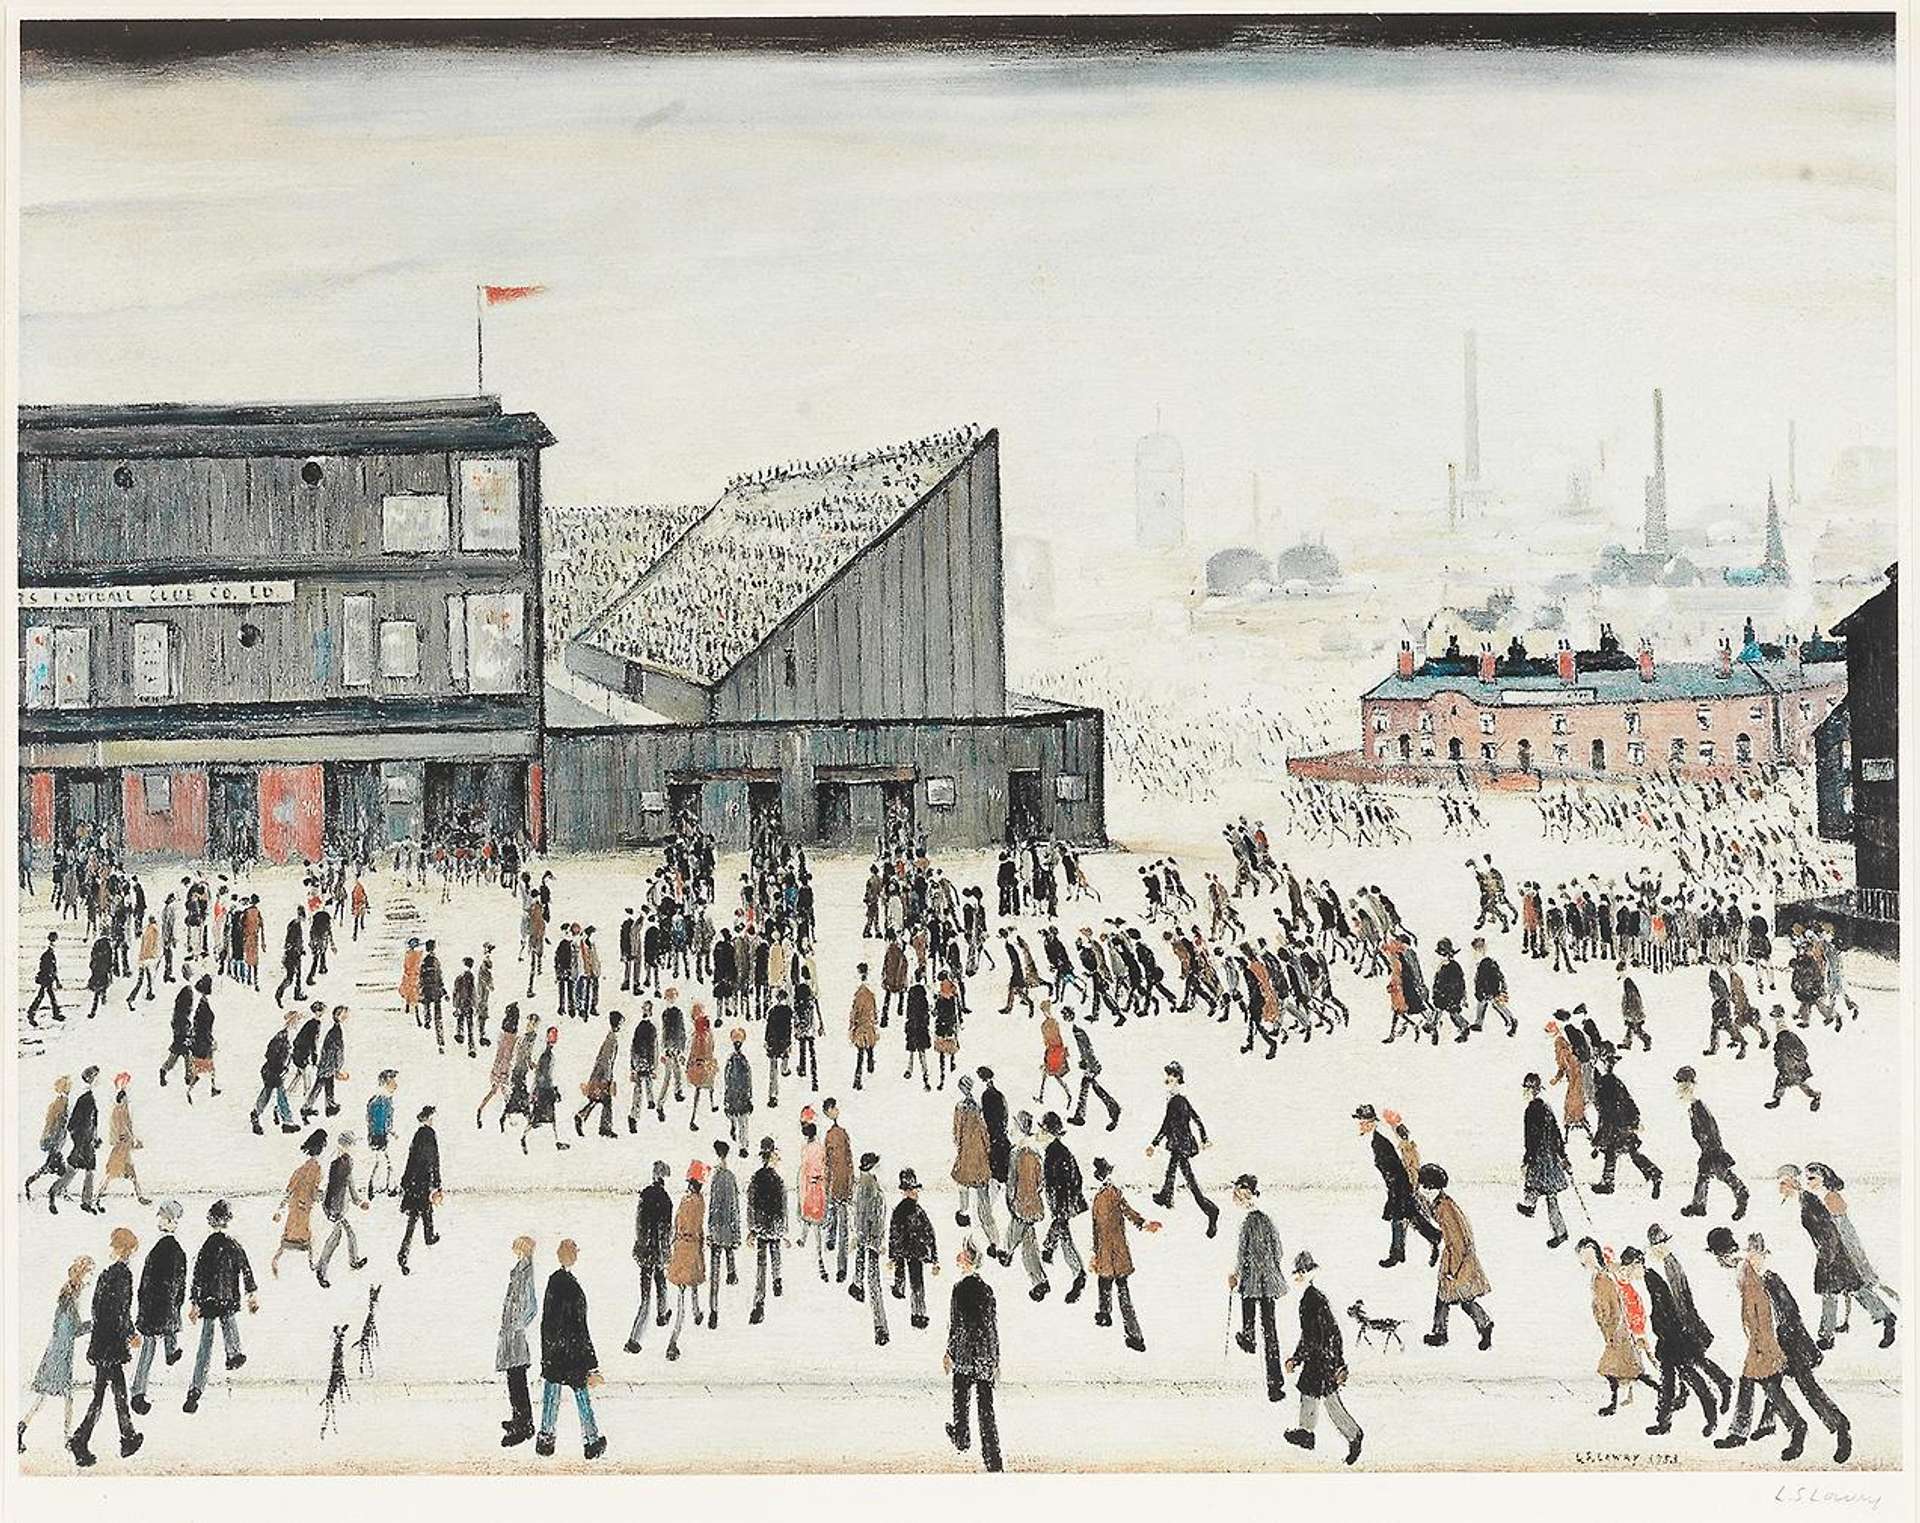 Going To The Match by L. S. Lowry